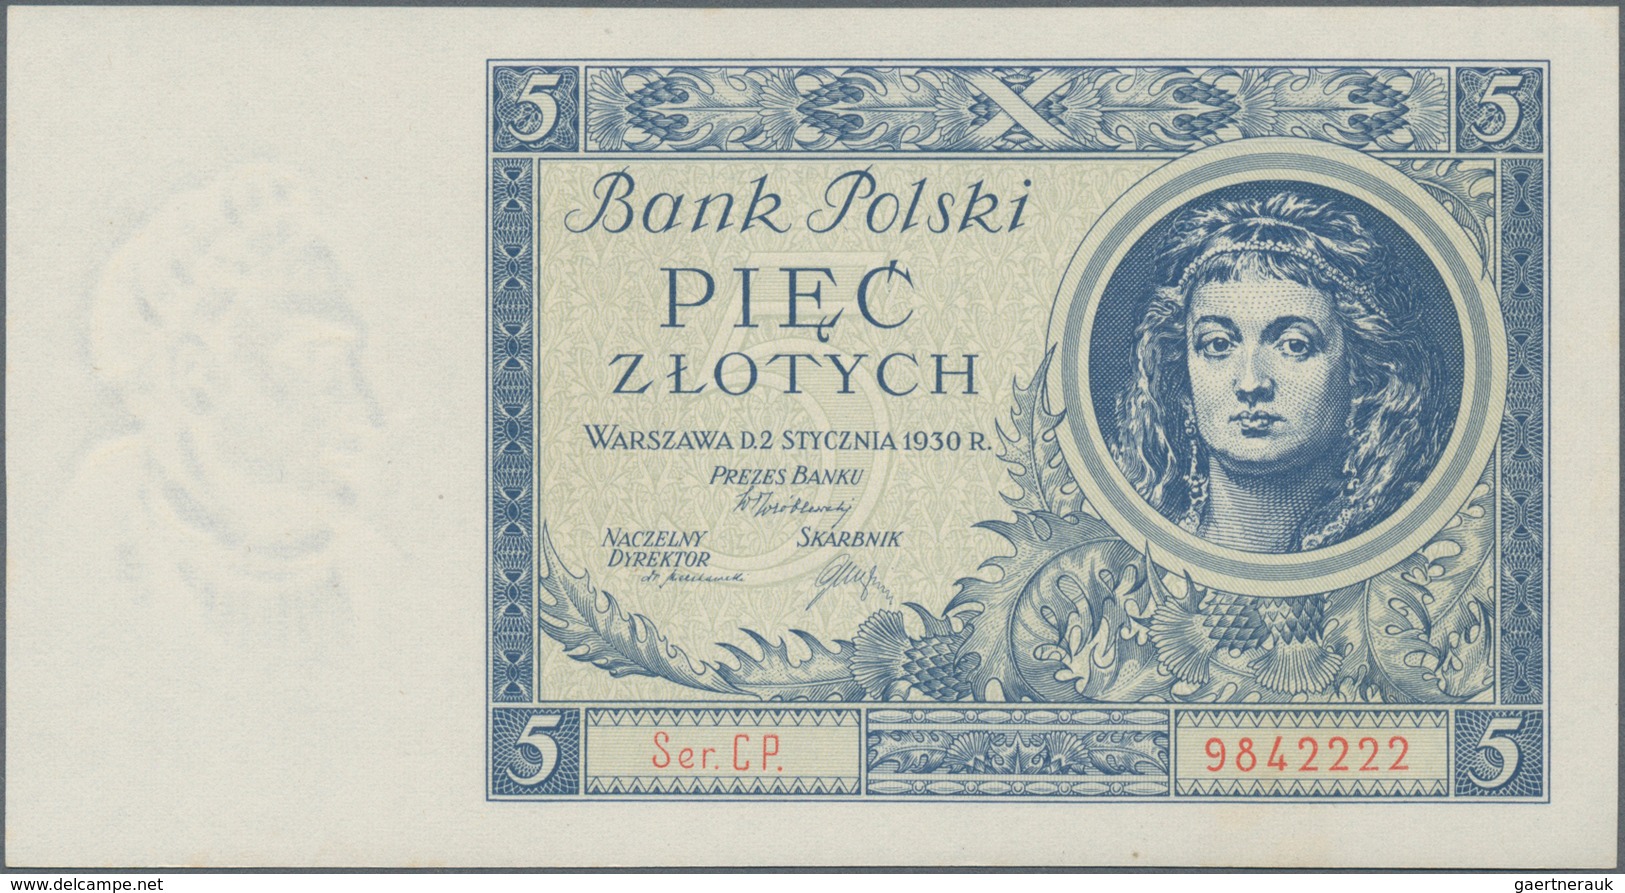 Poland / Polen: Set with 4 banknotes series 1931-34 with 5, 10, 20 and 100 Zlotych, P.69, 72, 73, 75